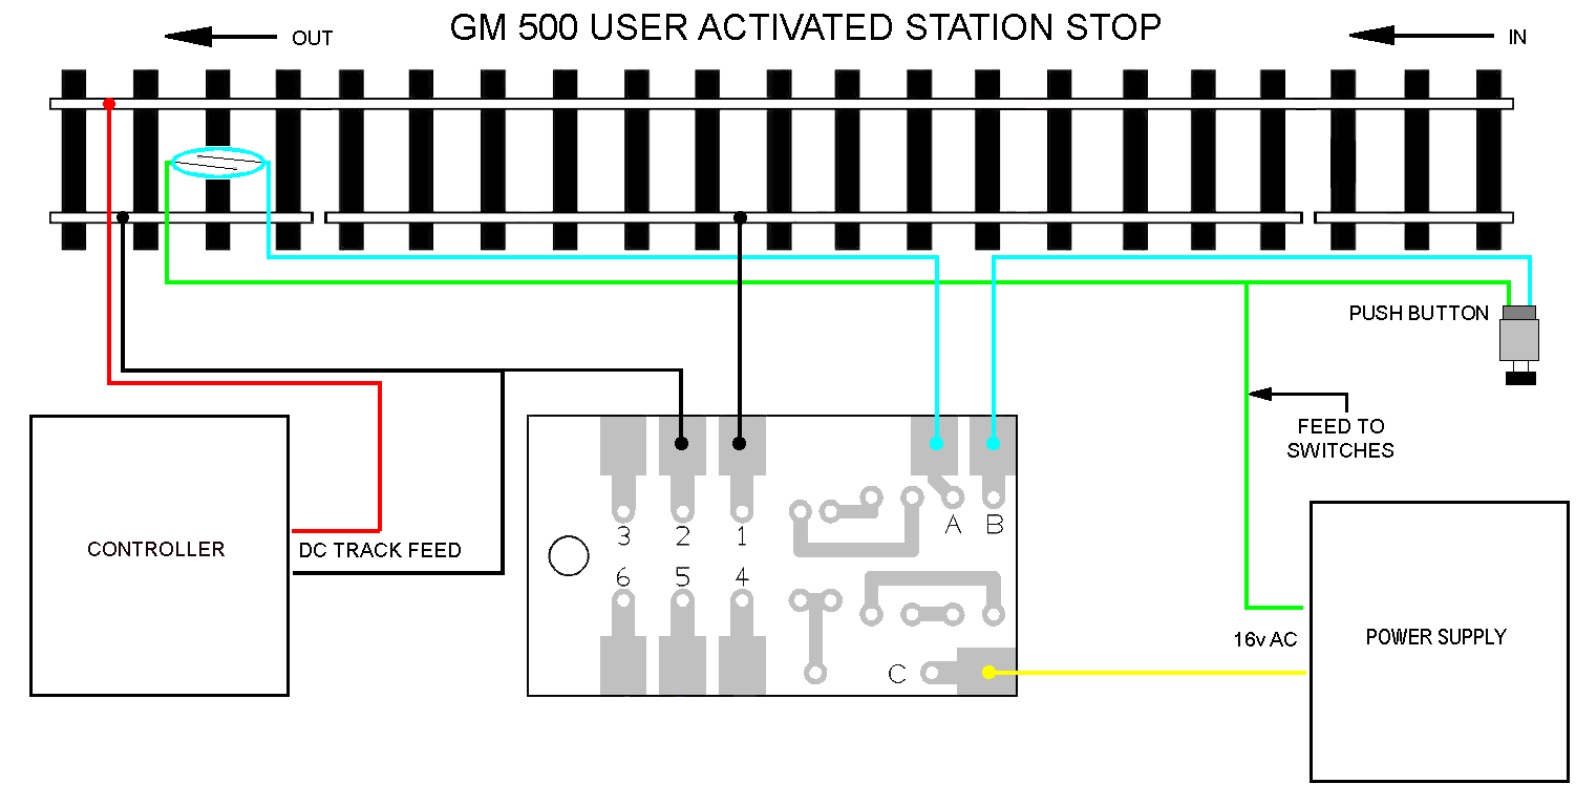 GM500 USER-ACTIVATED-STATION-STOP.